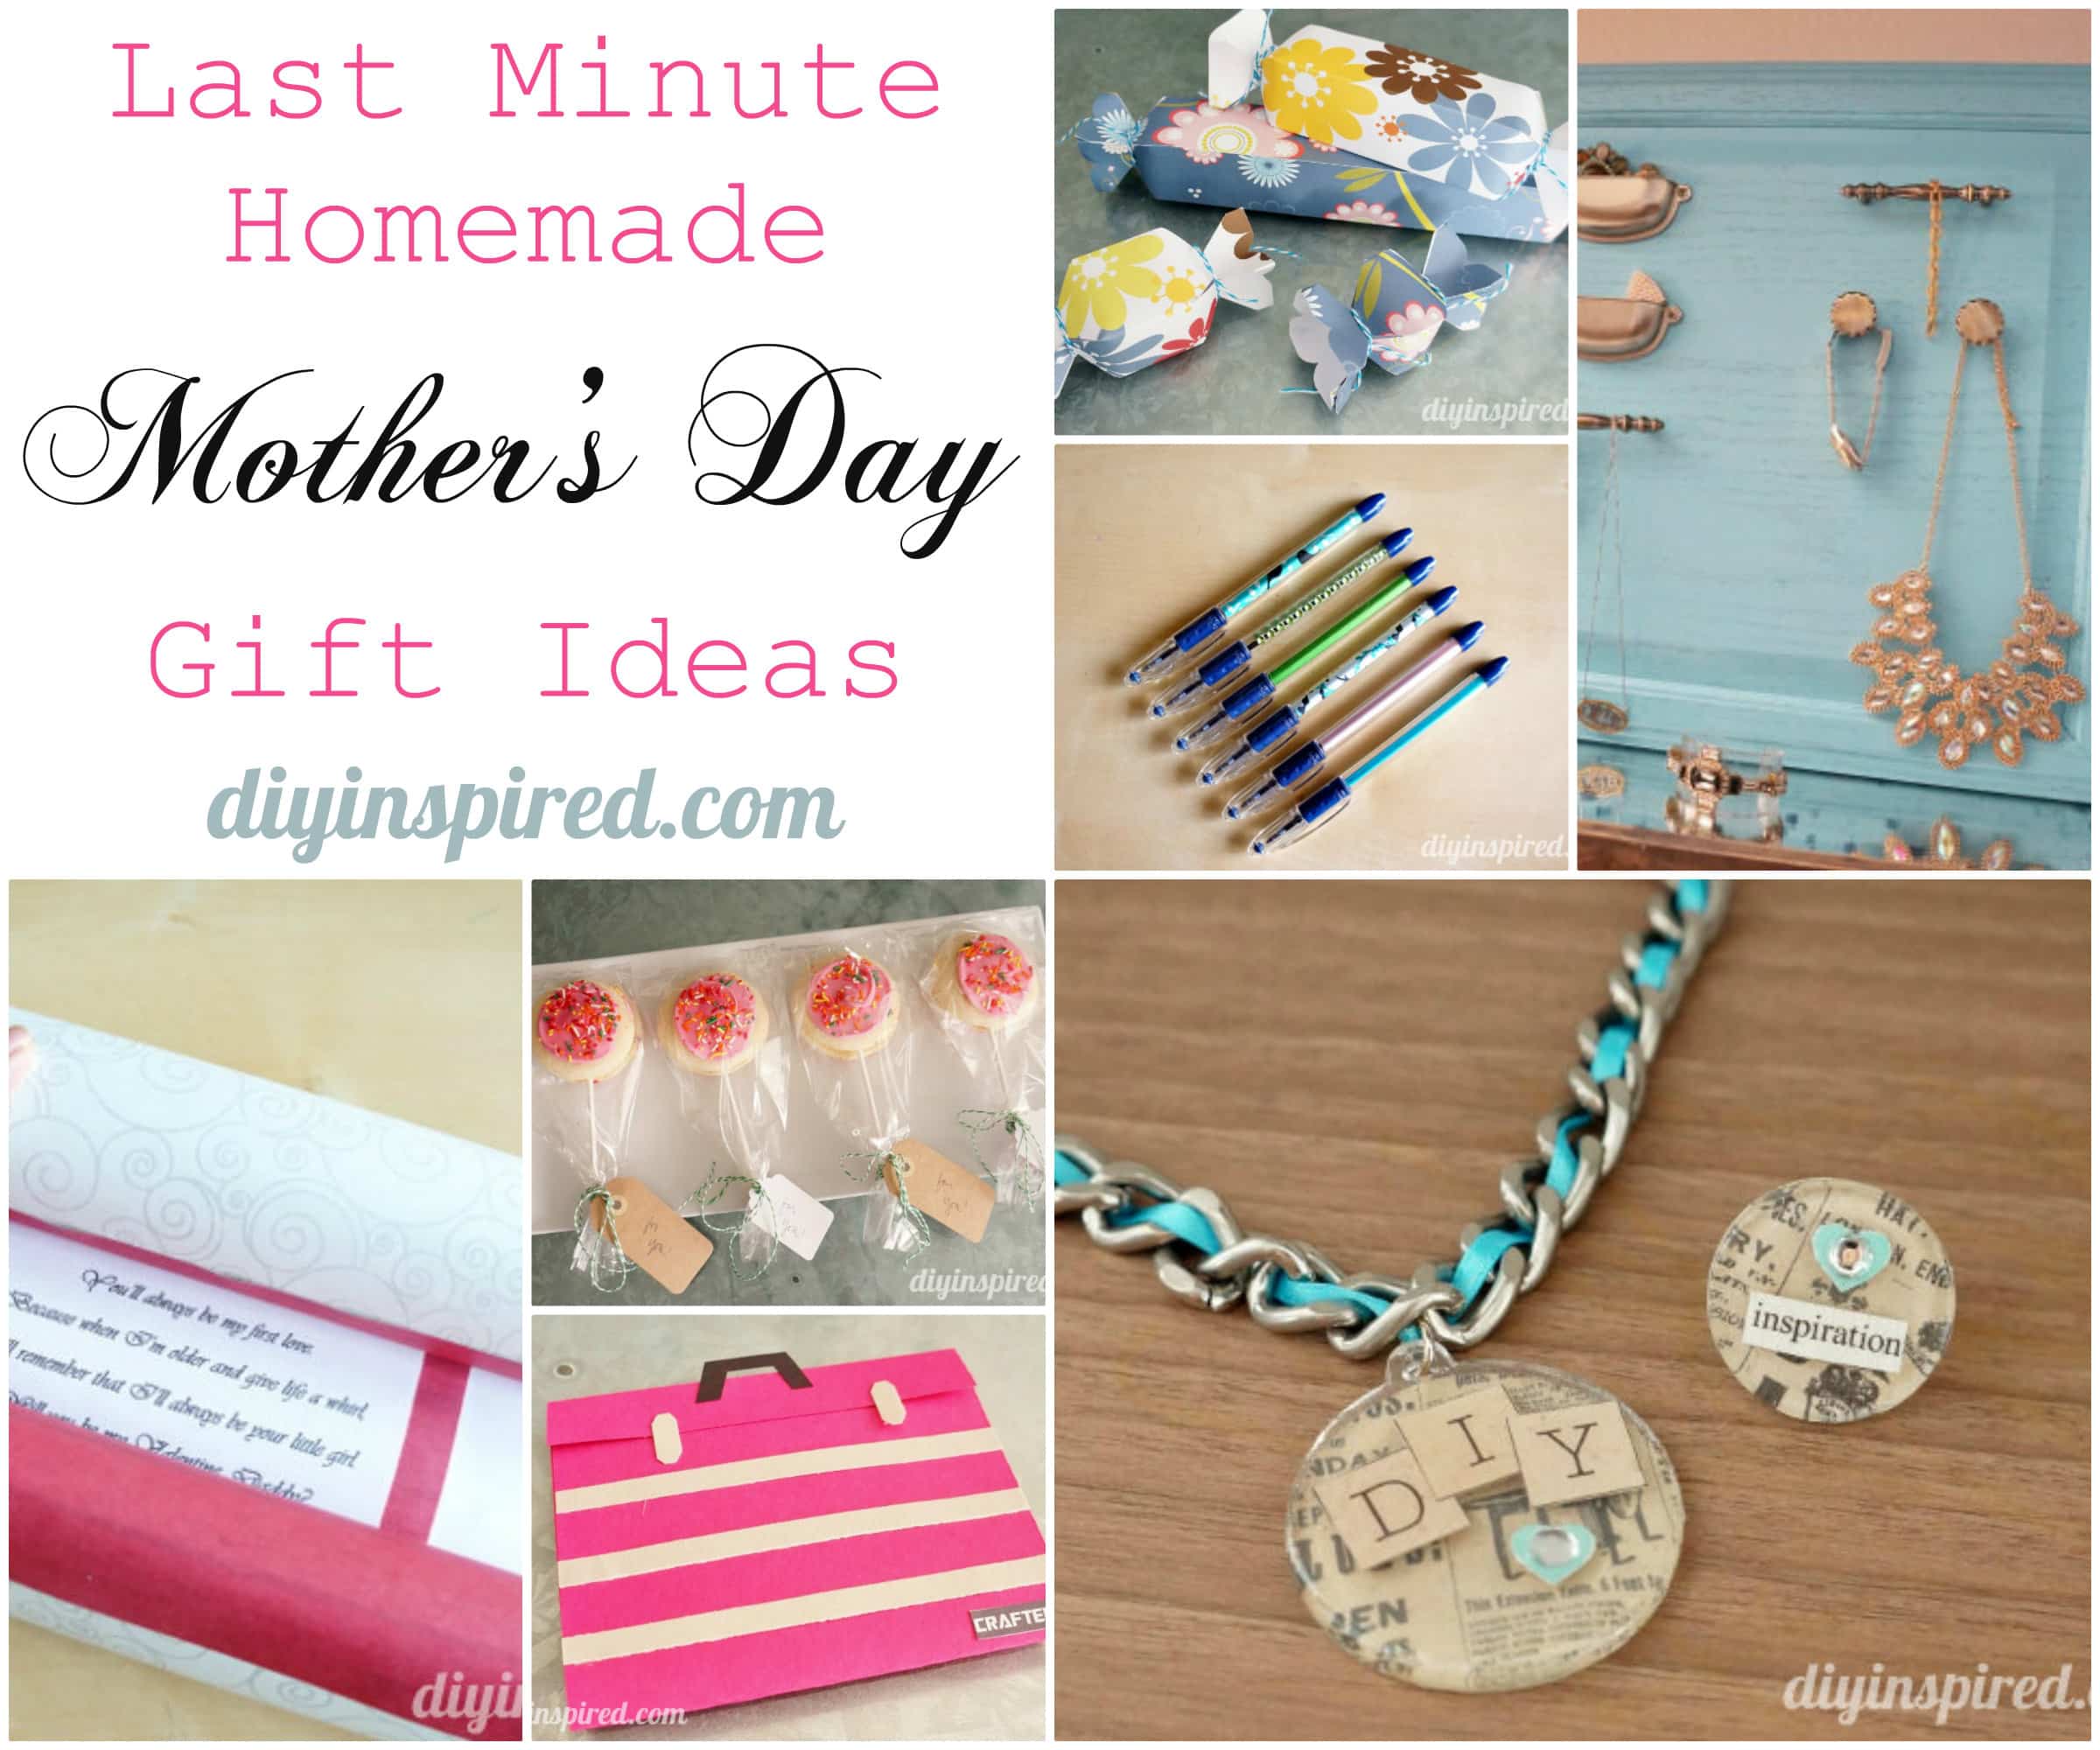 Last Minute Homemade Motherâ€™s Day Gift Ideas - DIY Inspired